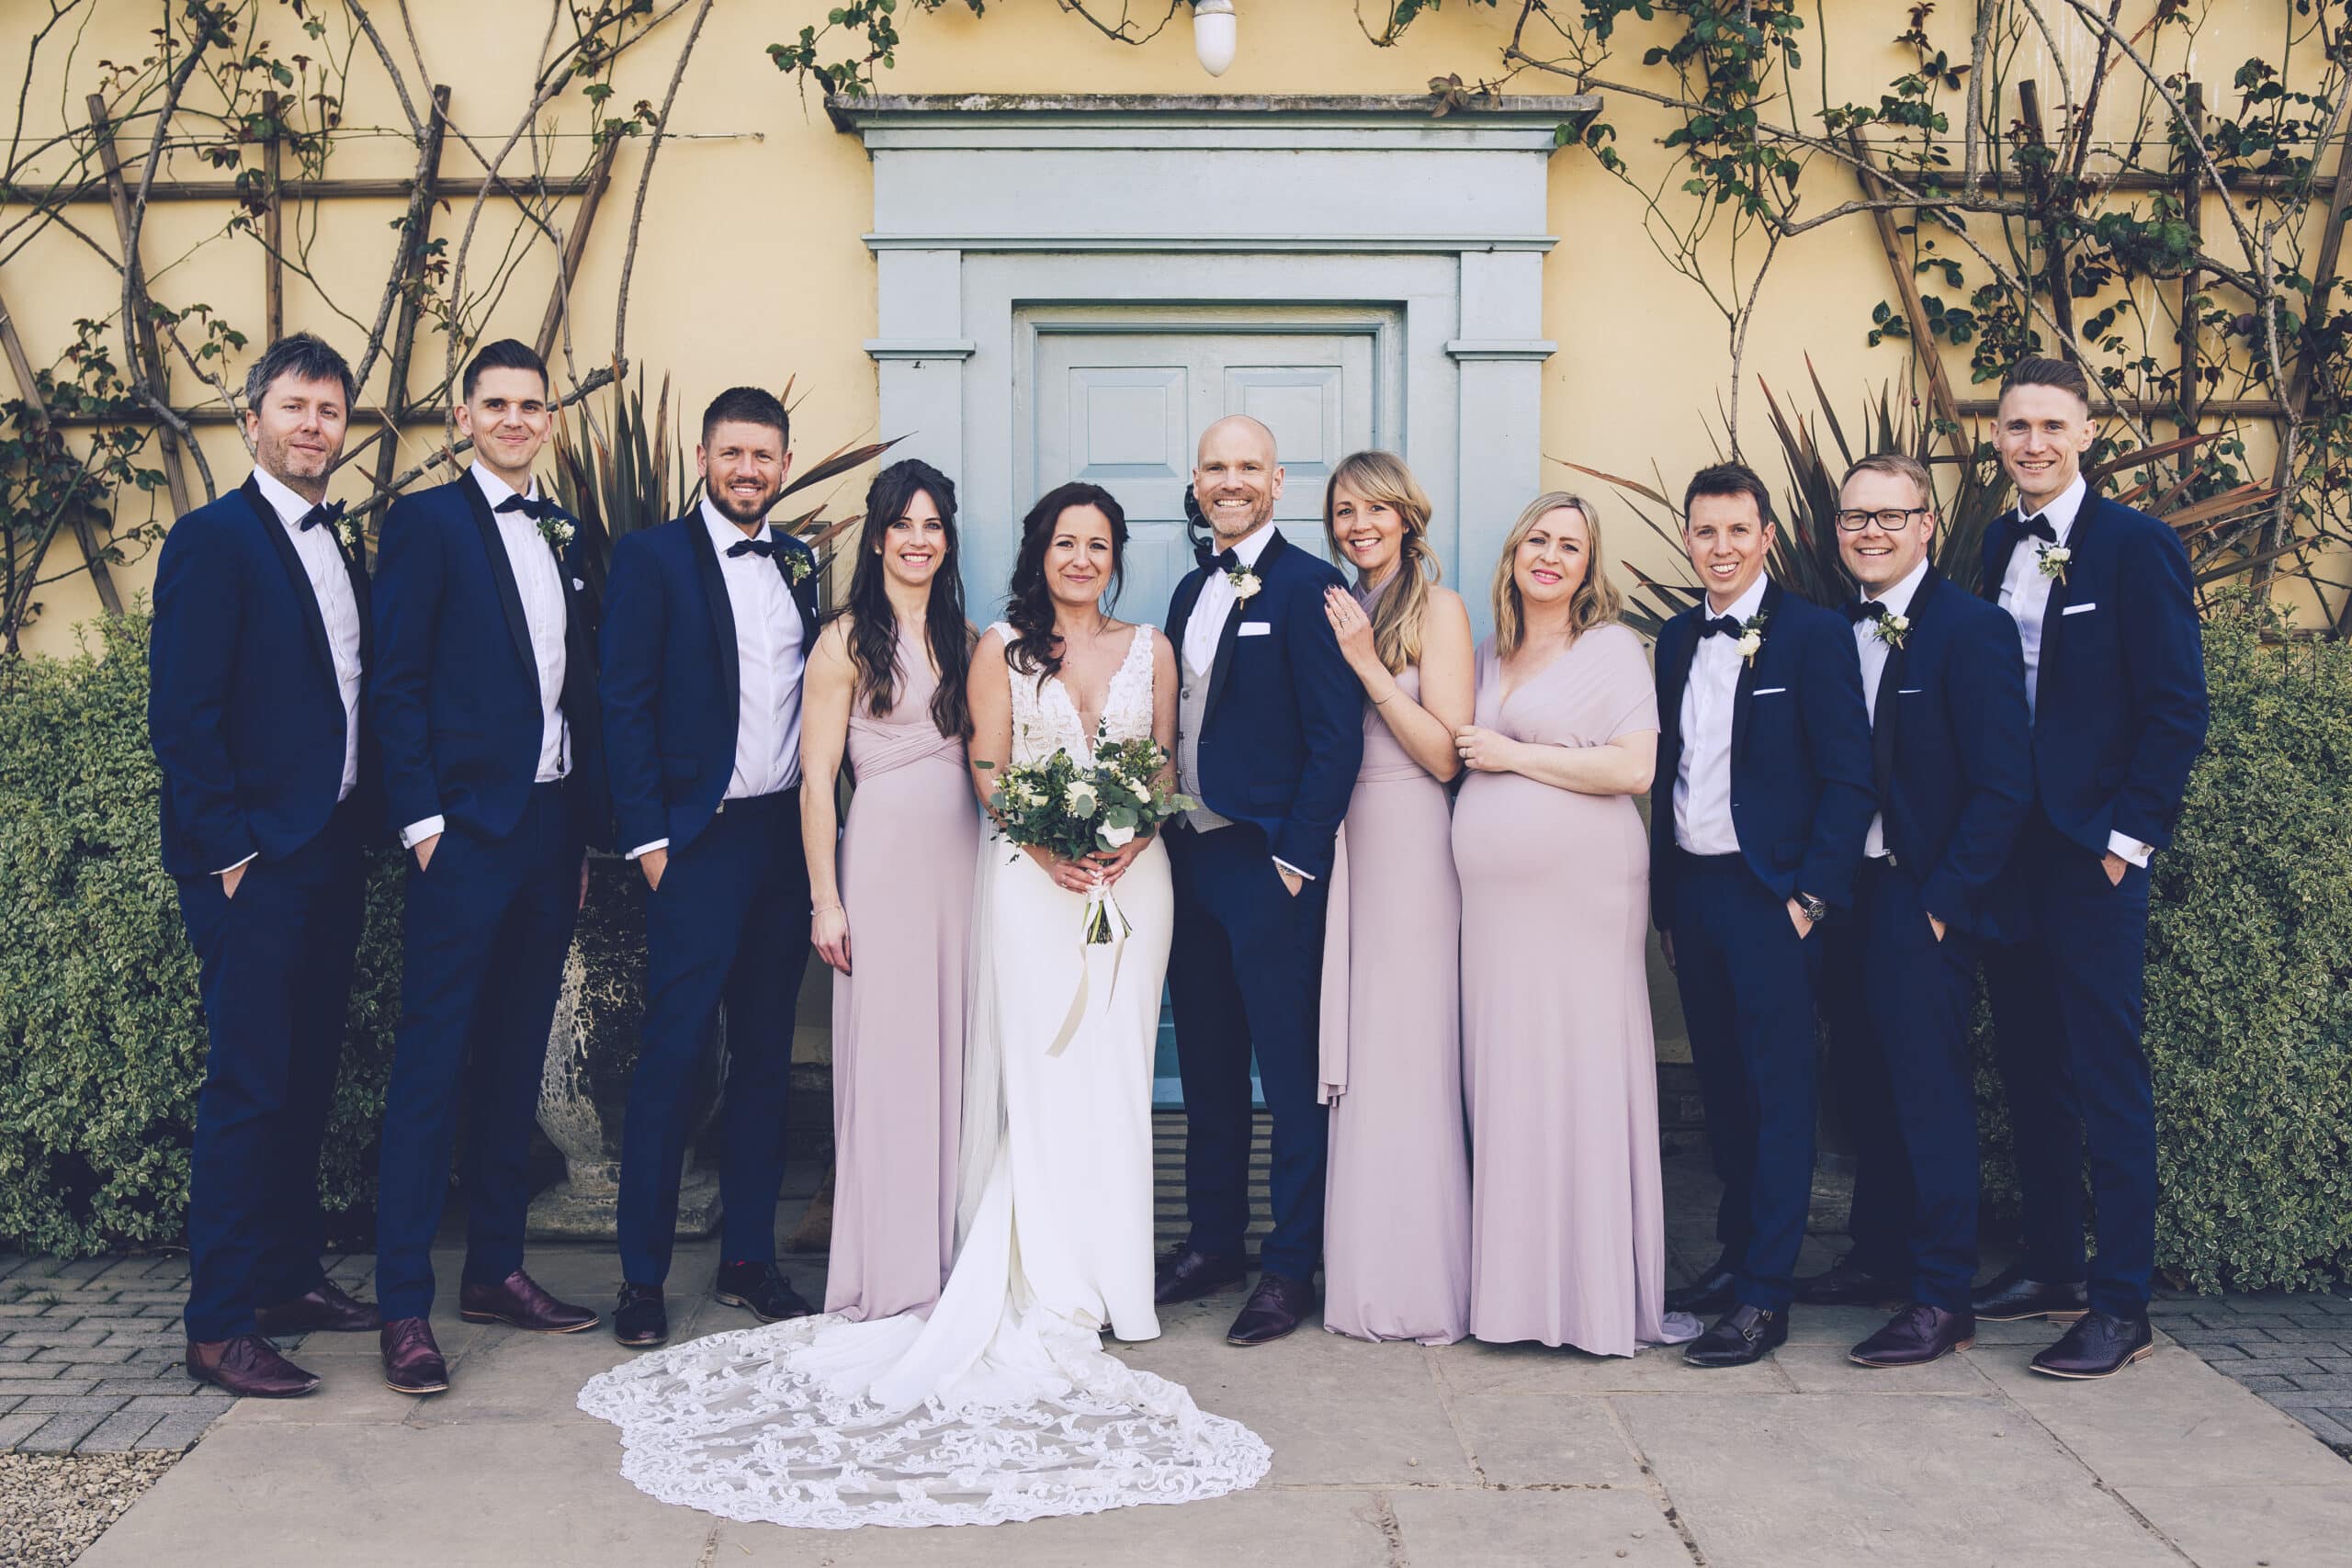 Bride and groom with bridal party on sunny day at countryside wedding venue